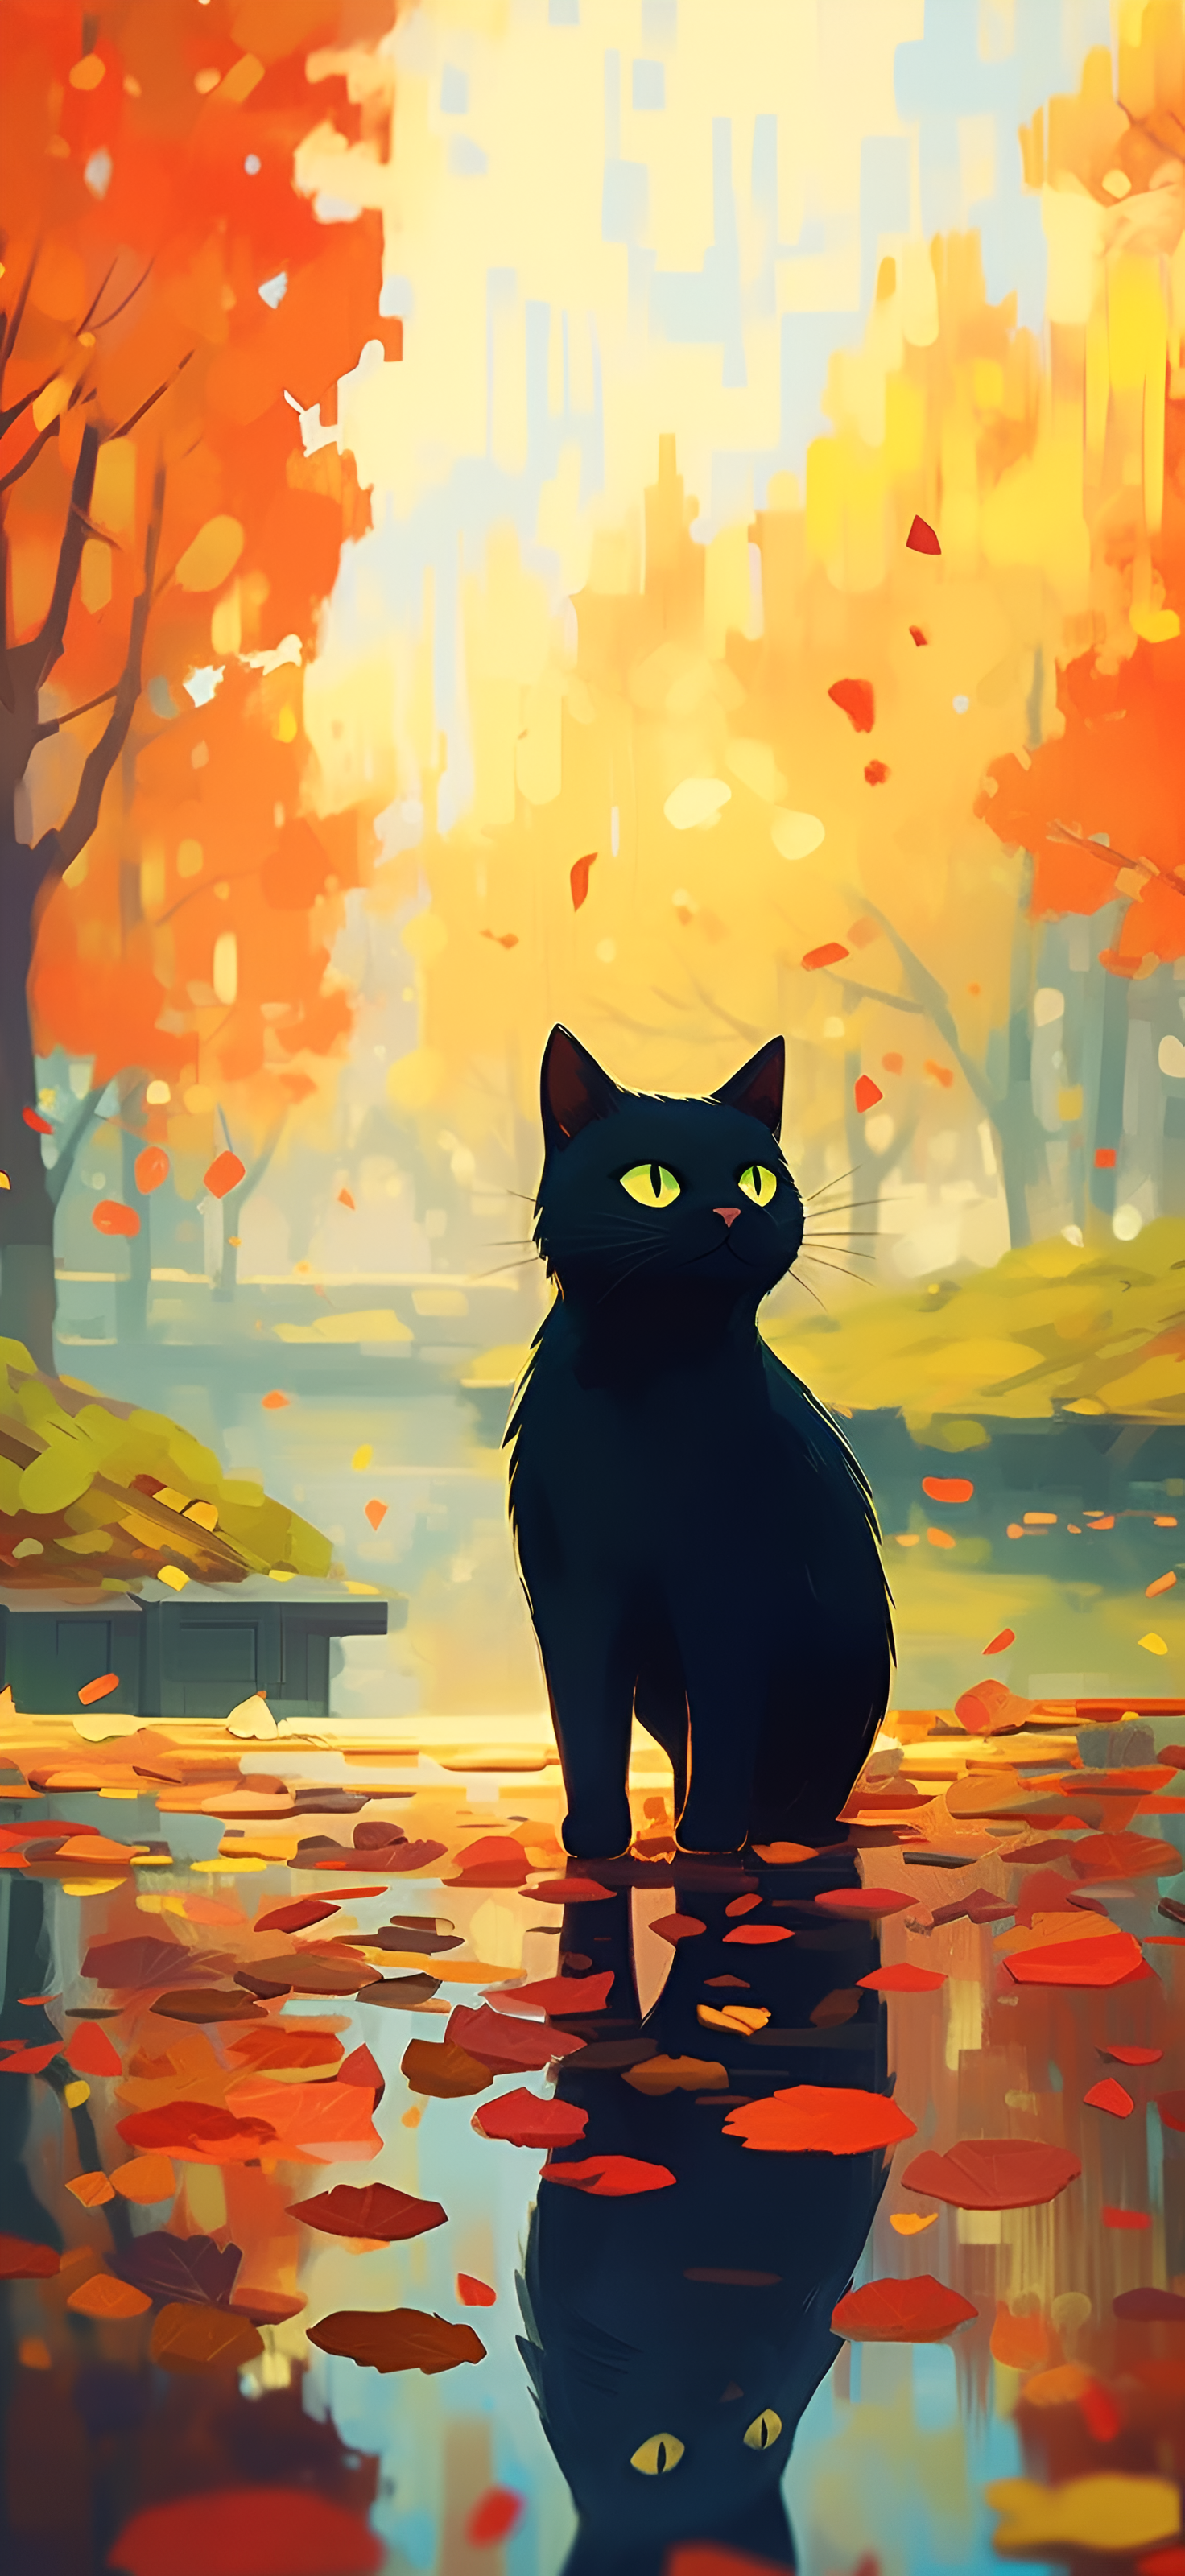 Black Cat Standing In Puddle Park During Autumn Aesthetic